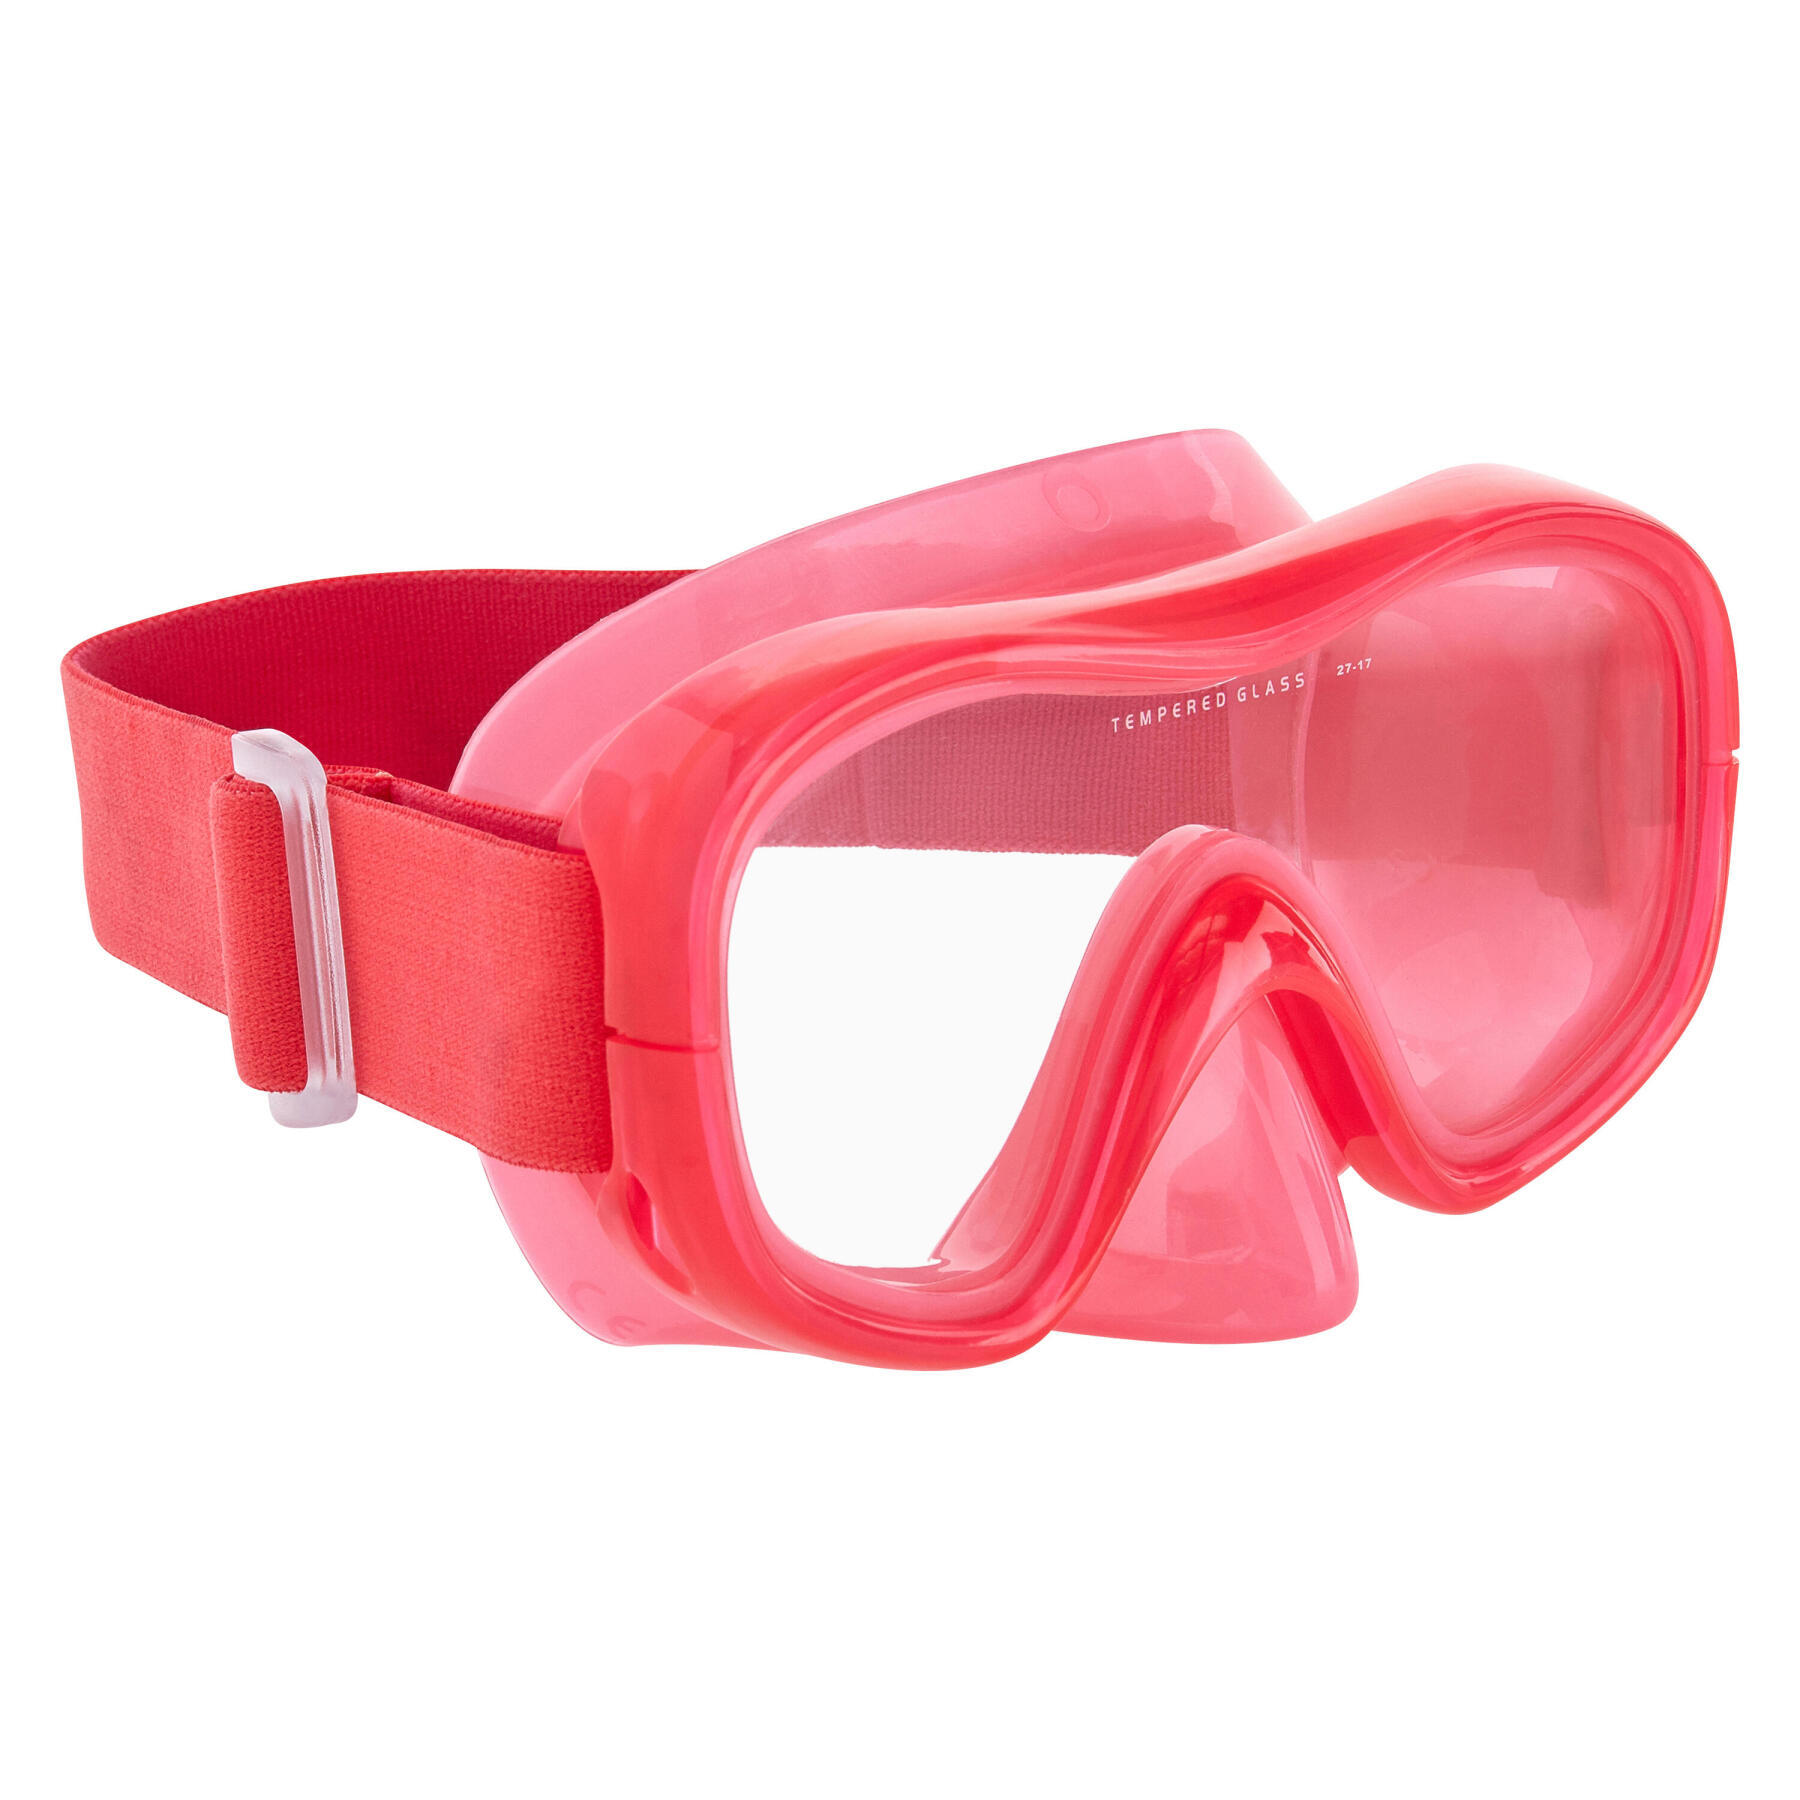 snk 520 mask pink